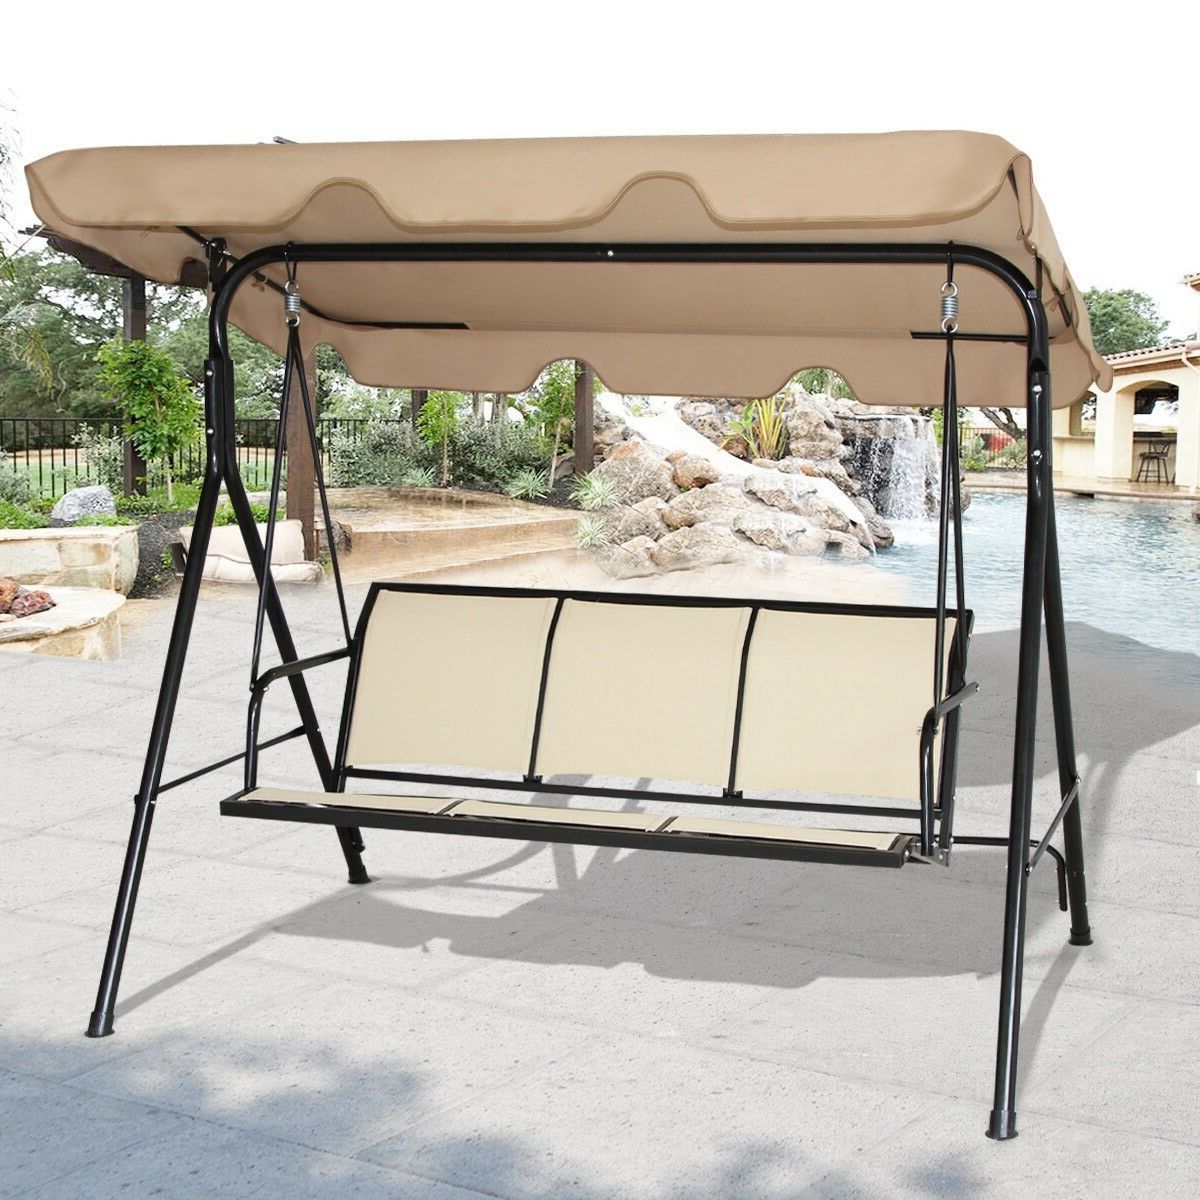 Fashionable Canopy Patio Porch Swings With Pillows And Cup Holders With Regard To Garden Outdoor 3 Person Family Canopy Glider Hammock Porch Swing Bench  Chair Us (View 23 of 25)